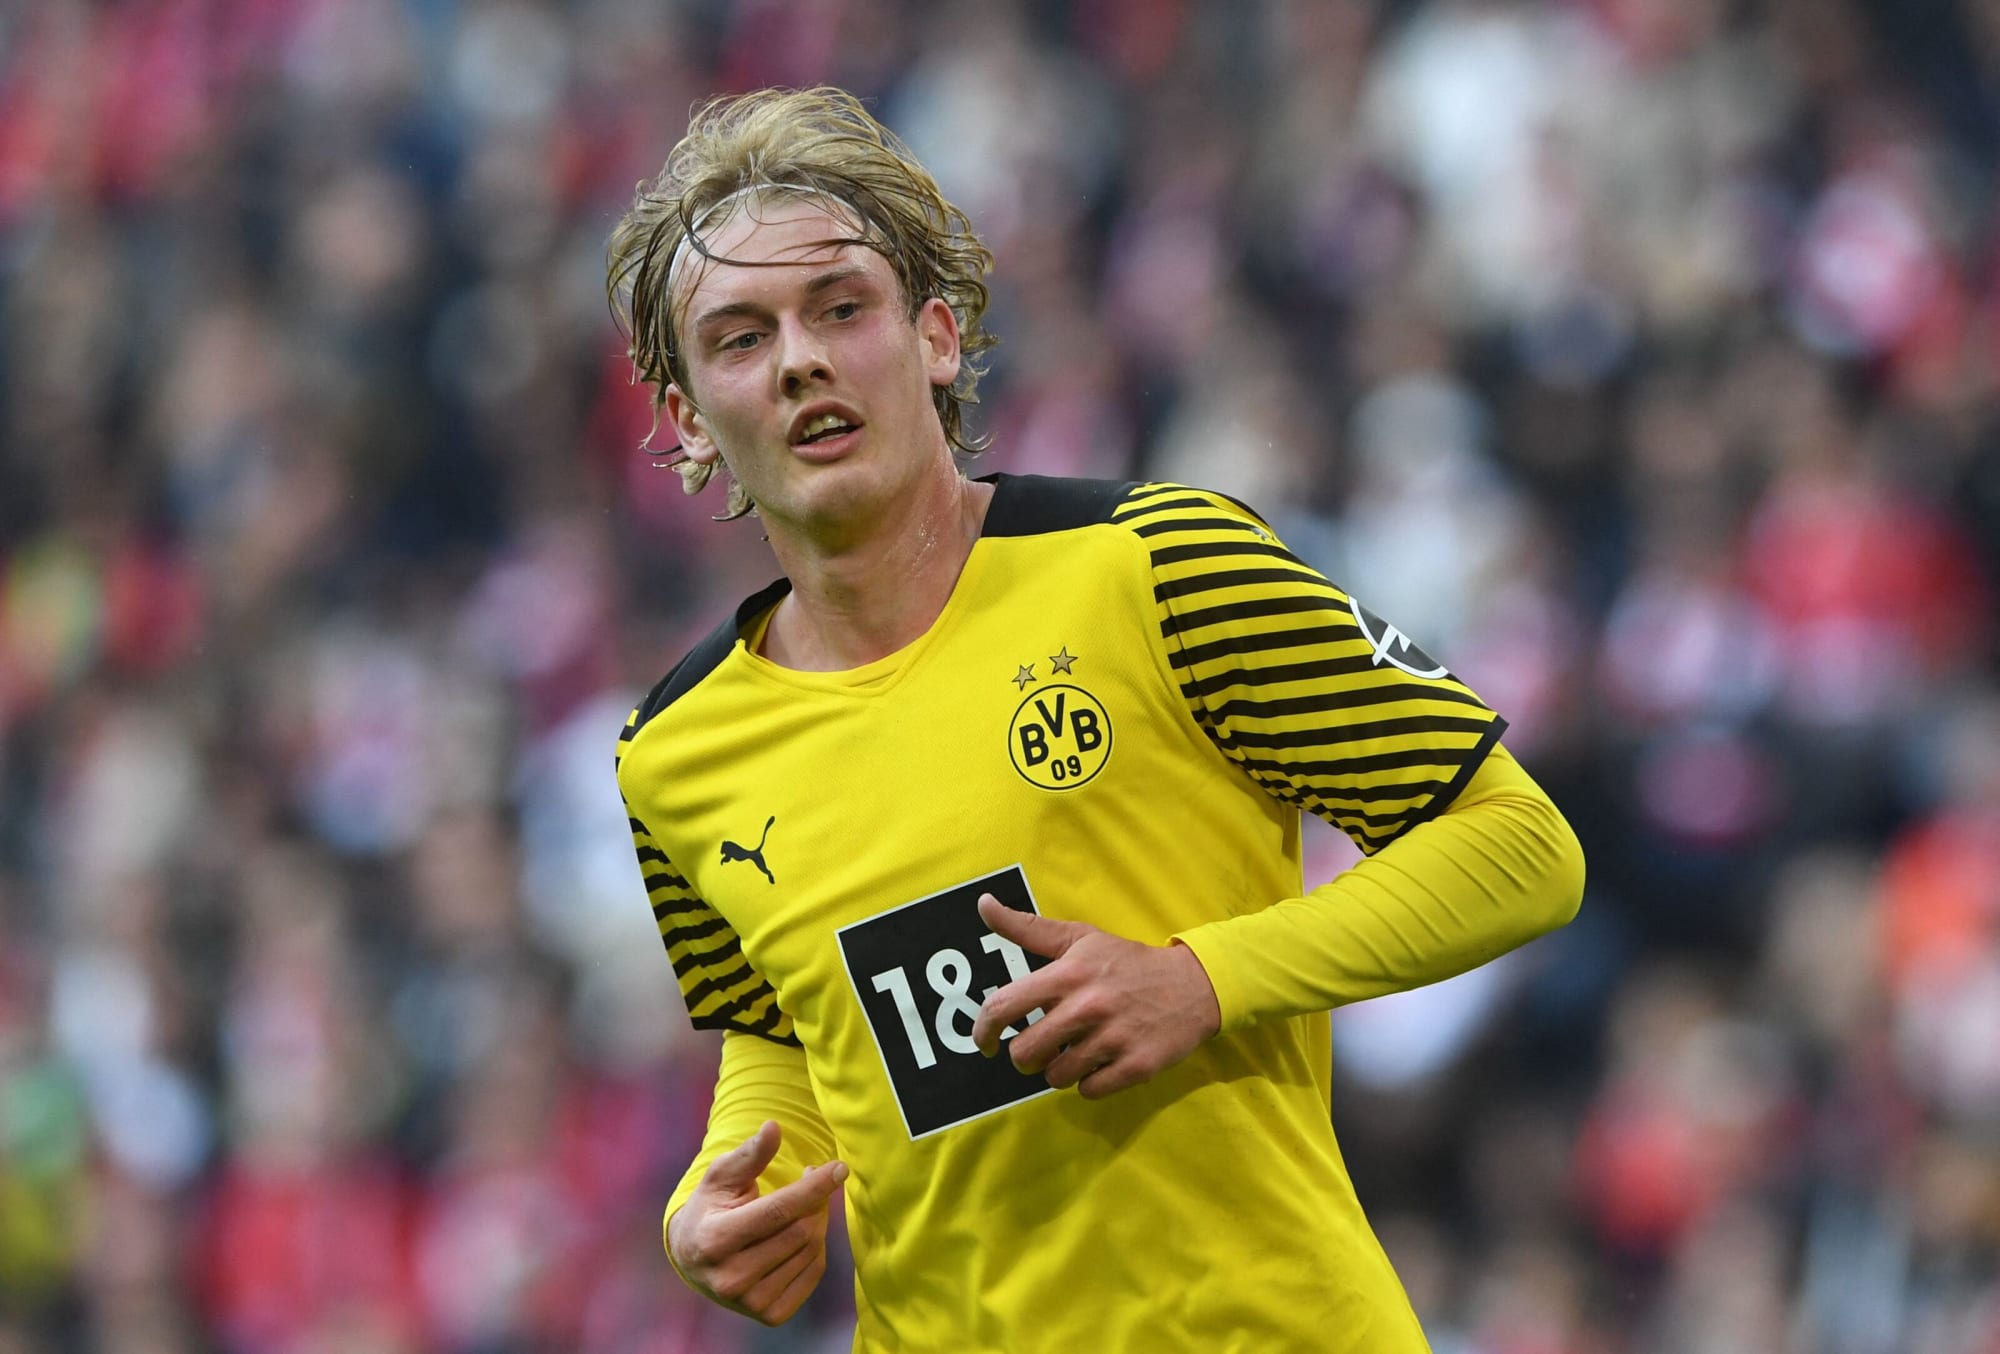  Julian Brandt, a midfielder for Borussia Dortmund, is shown in action during a match.